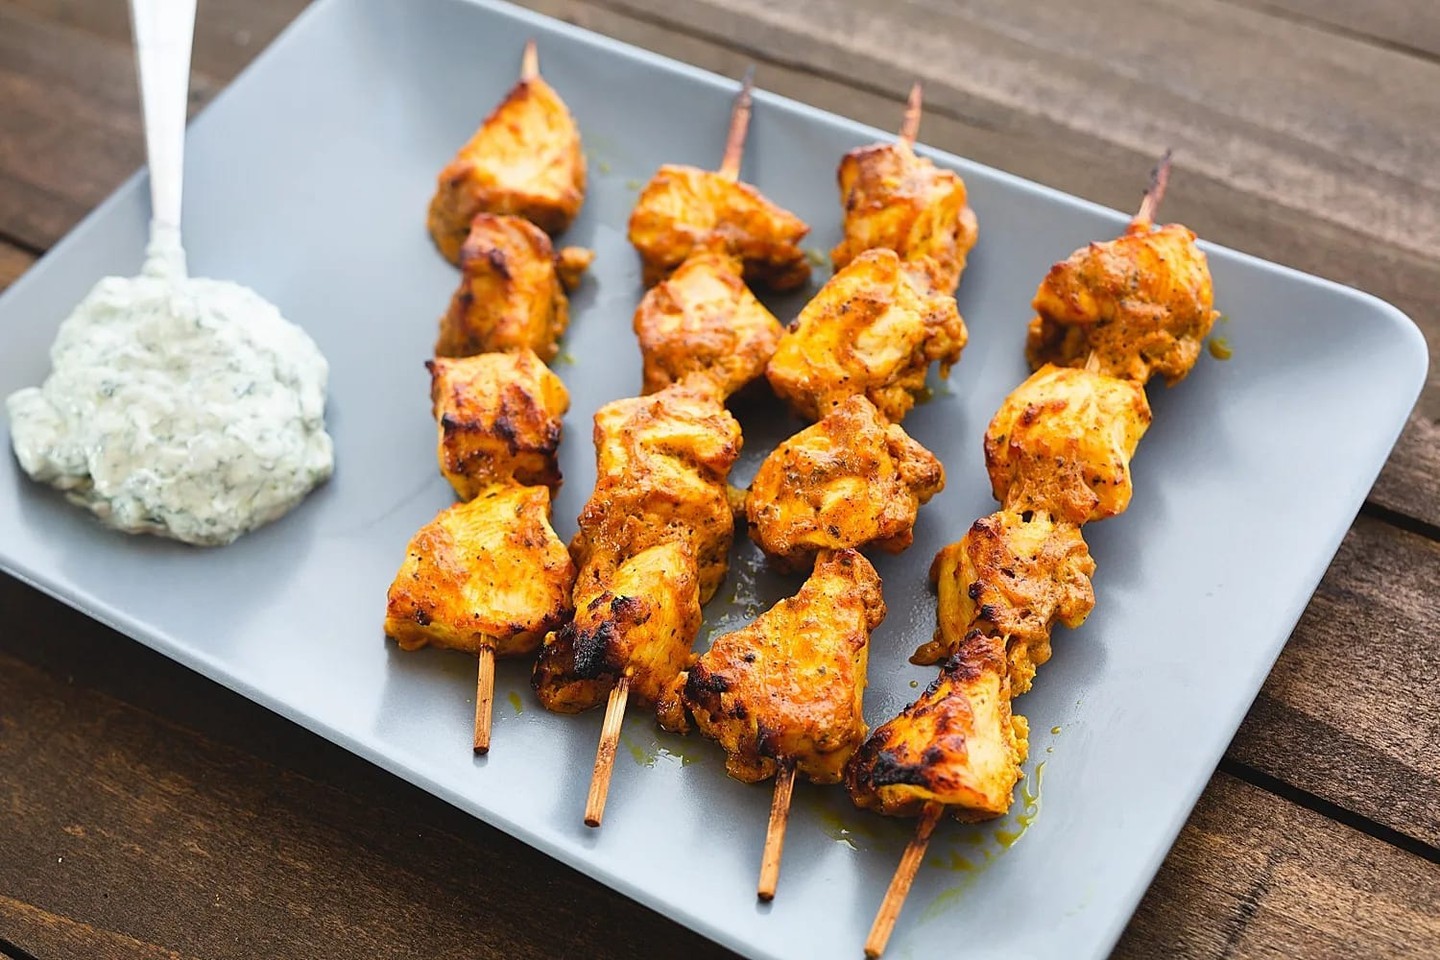 Have you ever marinated your chicken in yogurt? Yogurt seals the moisture into the chicken and makes it juicy and flavorful - the spice mixture adheres to the yogurt too and makes these kabobs extra bold and flavorful!⁣
⁣
Find this recipe at 𝗦𝗶𝘅𝗖𝗹𝗲𝘃𝗲𝗿𝗦𝗶𝘀𝘁𝗲𝗿𝘀.𝗰𝗼𝗺 - search "𝐘𝐨𝐠𝐮𝐫𝐭 𝐌𝐚𝐫𝐢𝐧𝐚𝐭𝐞𝐝 𝐂𝐡𝐢𝐜𝐤𝐞𝐧 𝐊𝐚𝐛𝐨𝐛𝐬" :-) You're definitely going to want to make these this summer when the weather warms up and you get that grill fired up!⁣
⁣
#sixcleversisters #kabob #chicken #marinate #yogurtmarinade #yogurt⁣
#dinner #grilling #summer #summertime #bbq #barbeque #summerfun #grilled #grill #meat #dinner #easyrecipe #dinnerrecipe #dinnertime #rotd #recipeoftheday #recipes #recipe #eat #summerdays #pitmaster